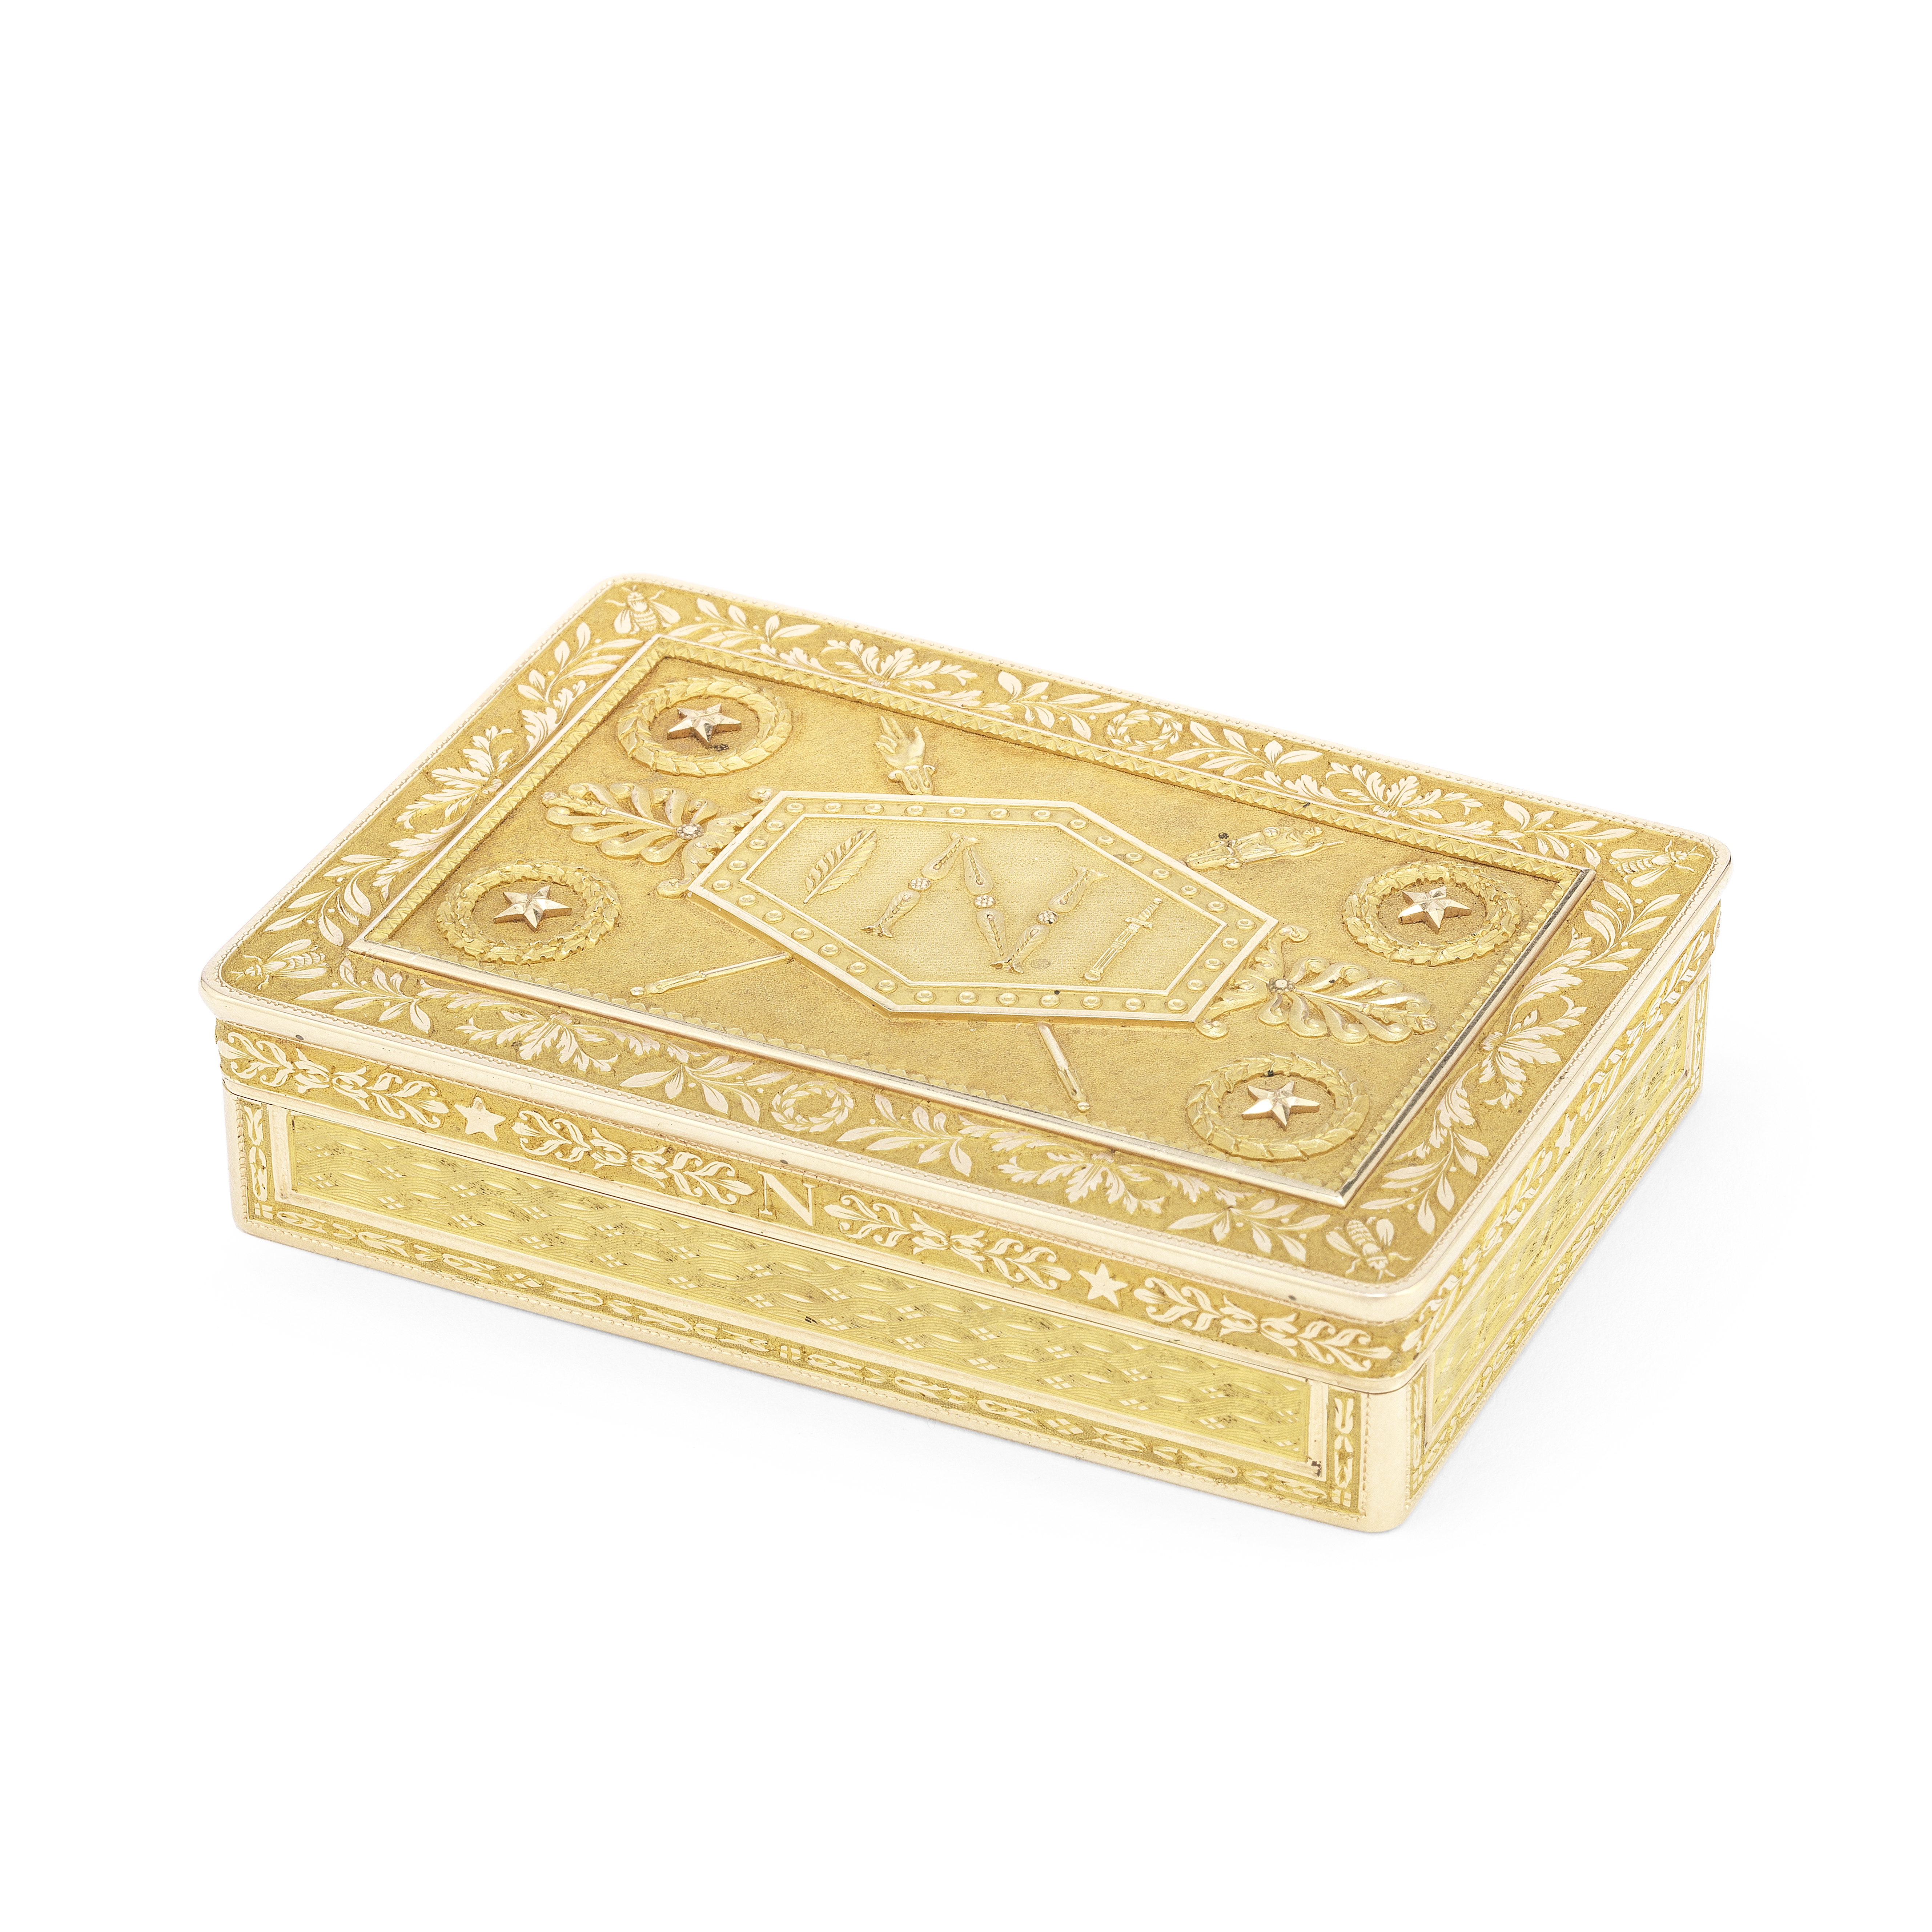 An important French Imperial gold snuff box with the cipher of Napoleon Bonaparte by L&#233;ger-F...